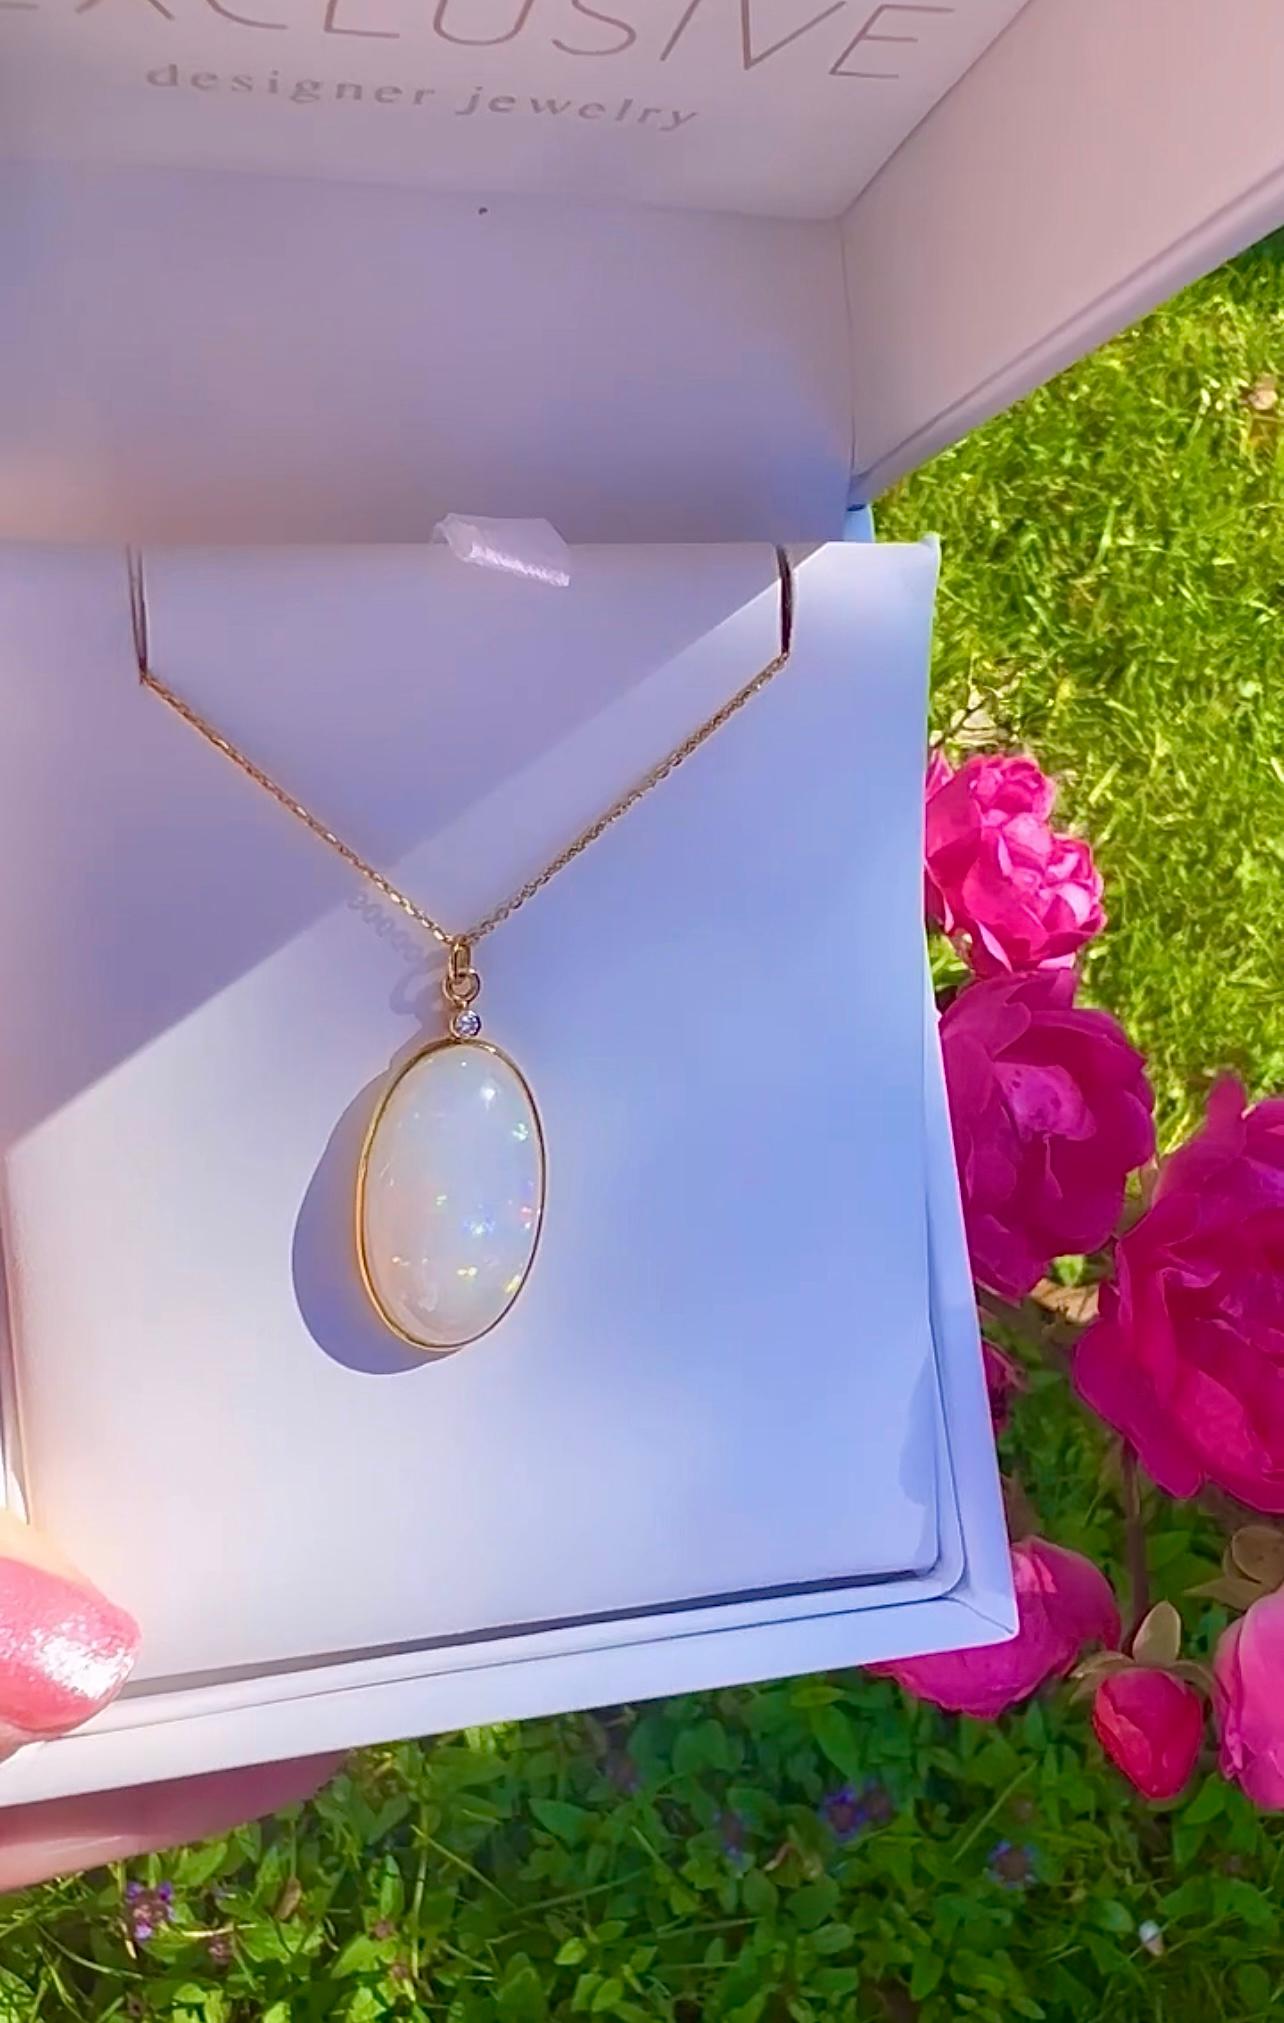 Luxurious Opal Bezel 18K gold necklace. This lovely charm has shimmering opal in an oval shape full of play of color. Breathtaking! Must see! Truly a beautiful necklace for opal lovers! 
Luxurious look. 
Length 16 inches-18inches
The pendant is 1.2